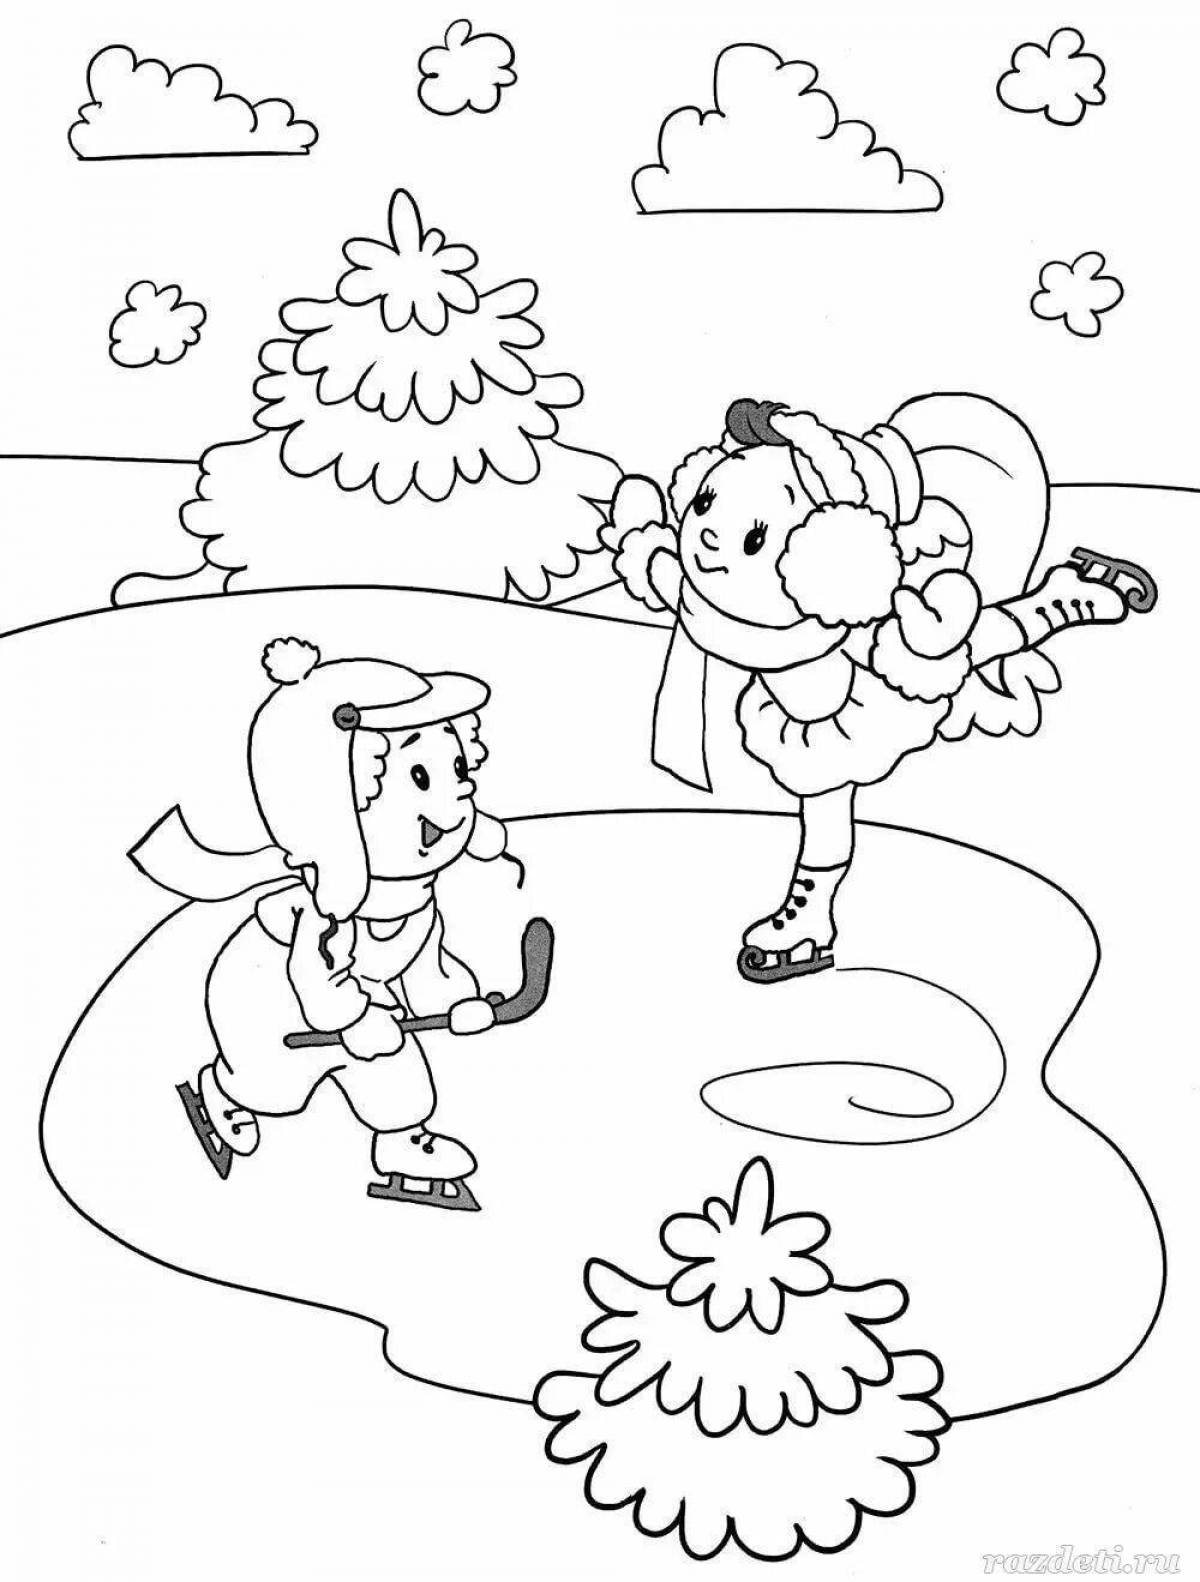 Playful winter coloring for pre-k